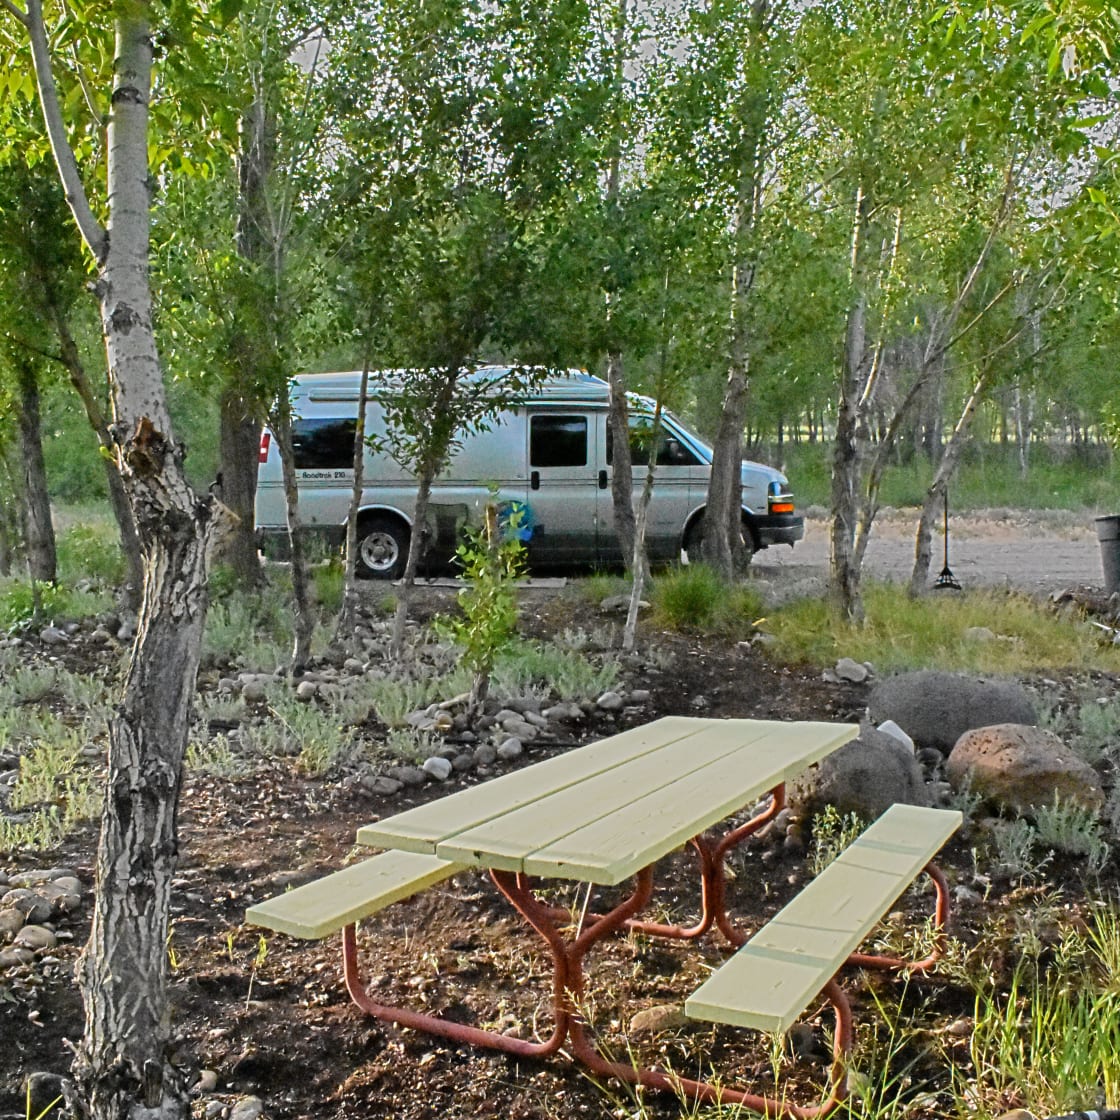 picknick table with a Van parked in site 1.